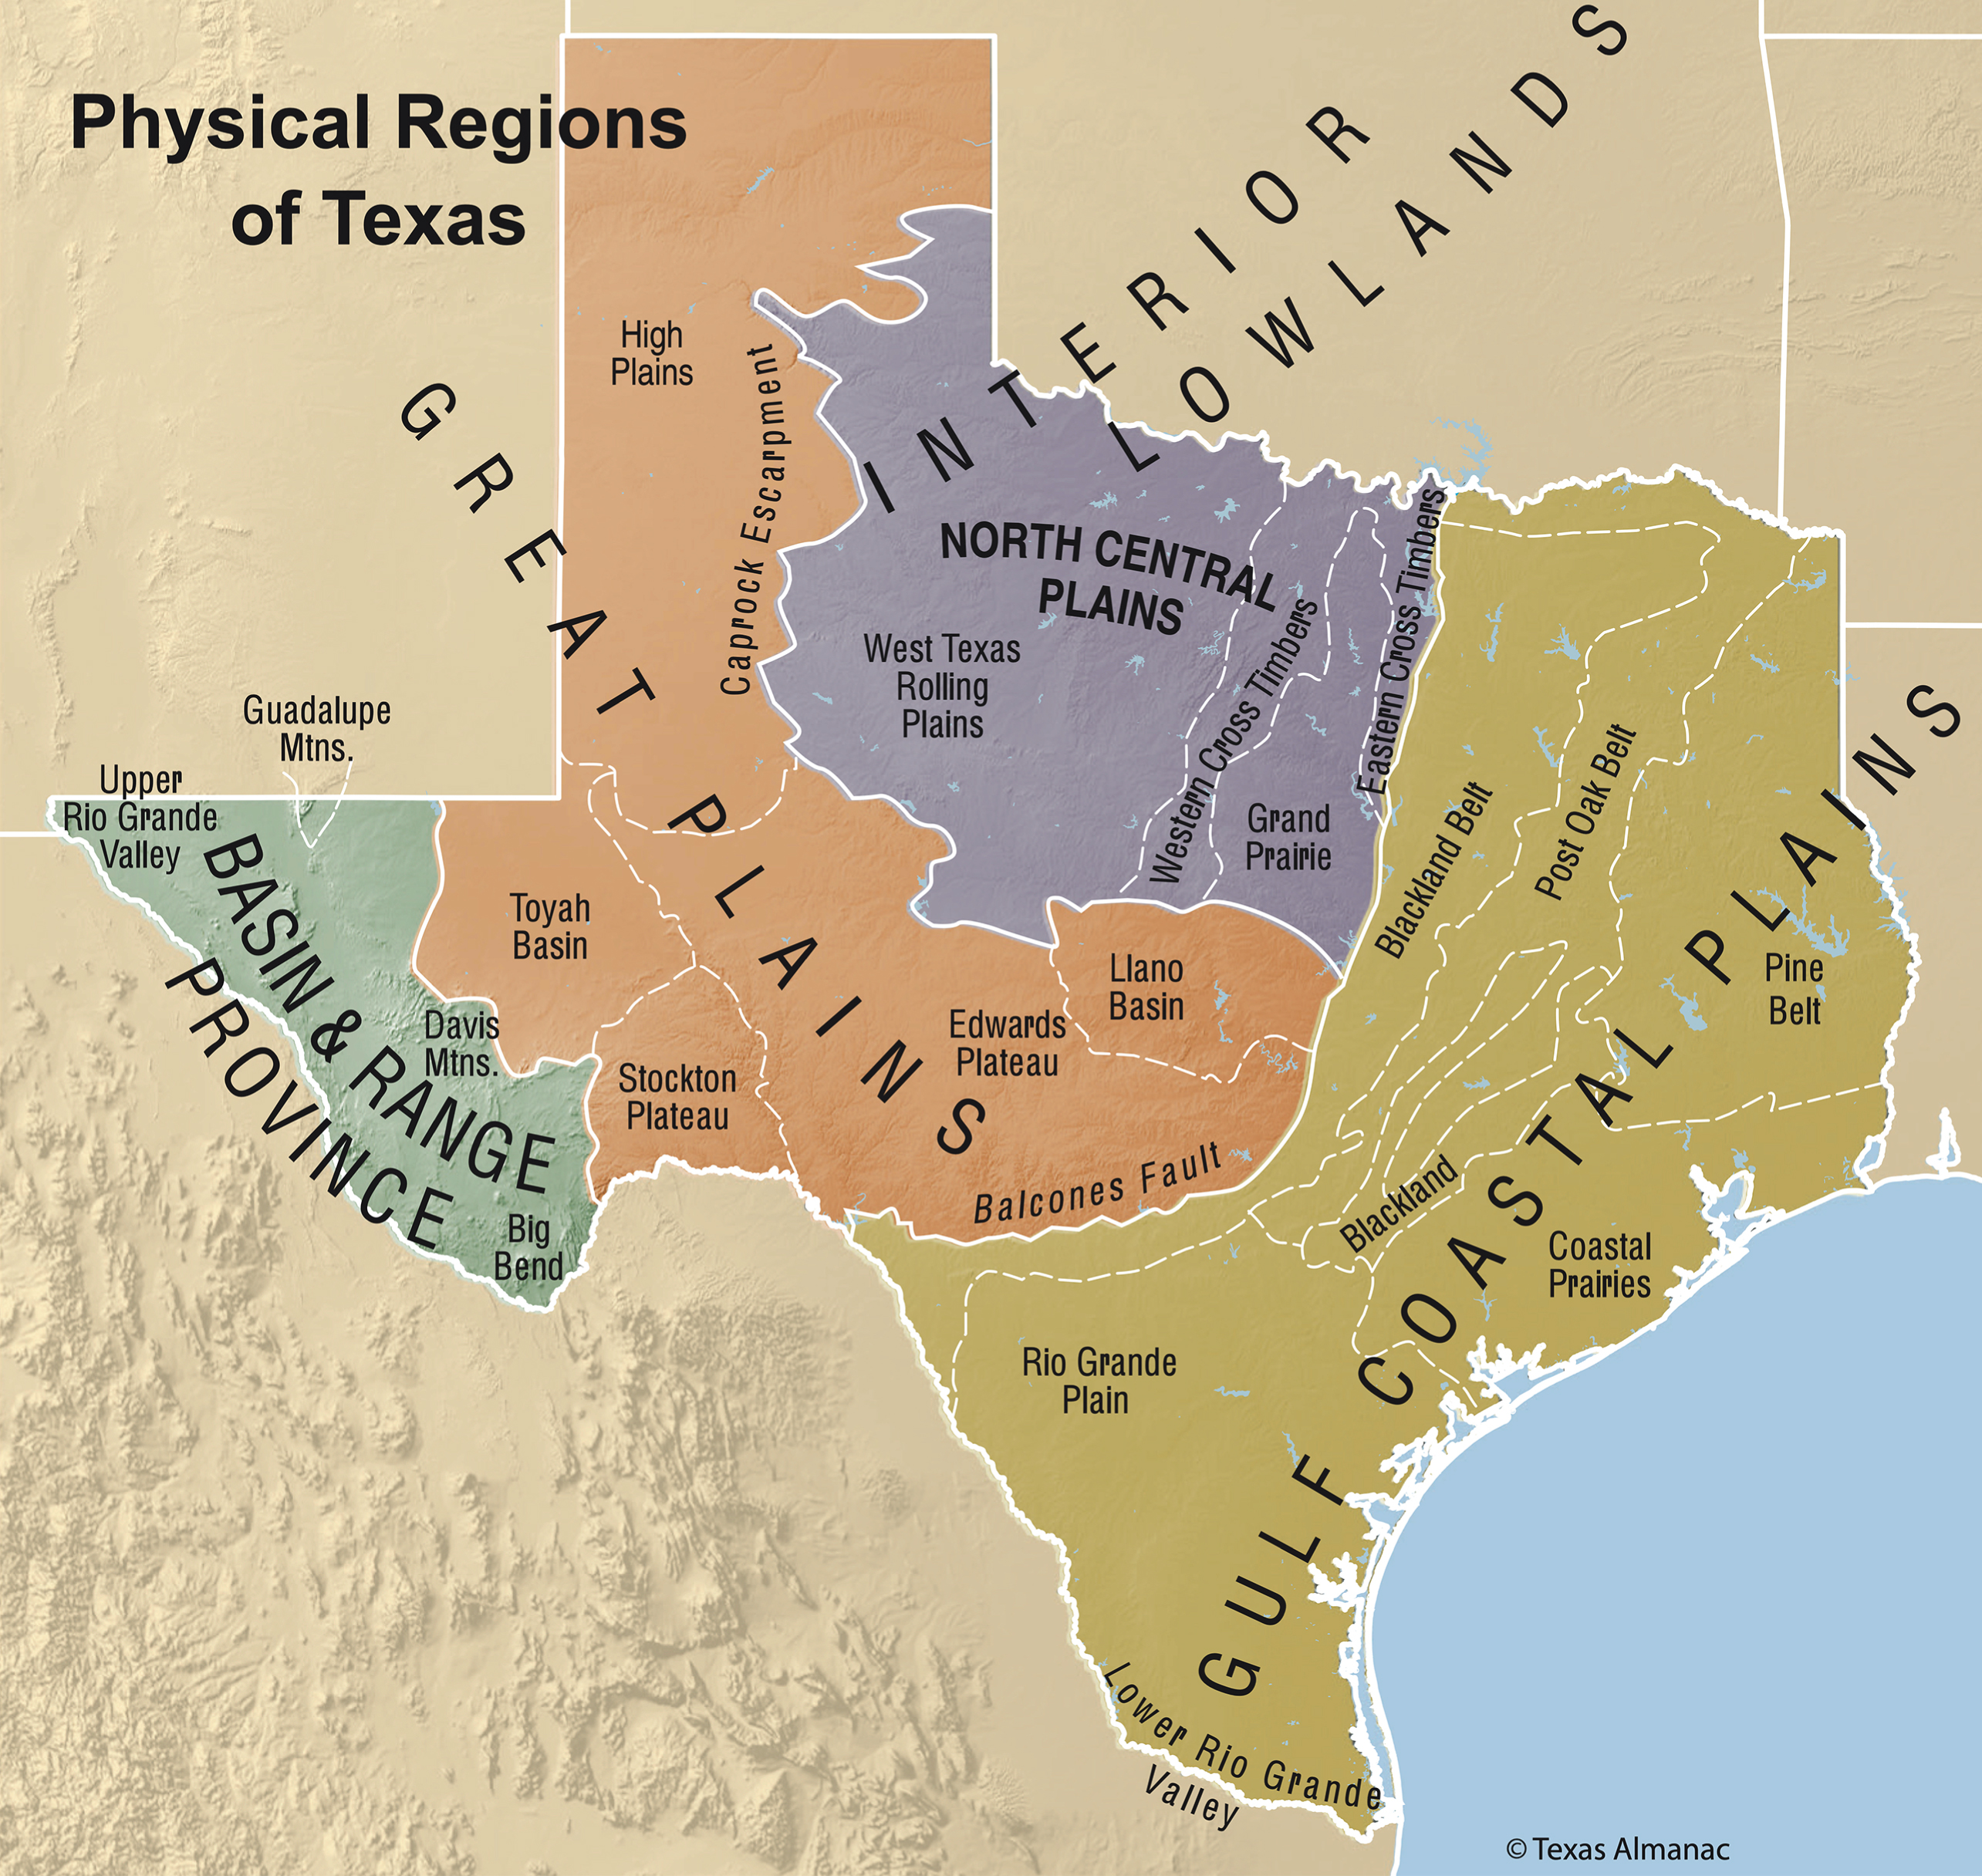 Major Physical Regions and Sub-Regions of Texas. Map Created by the Texas State Historical Association [12].